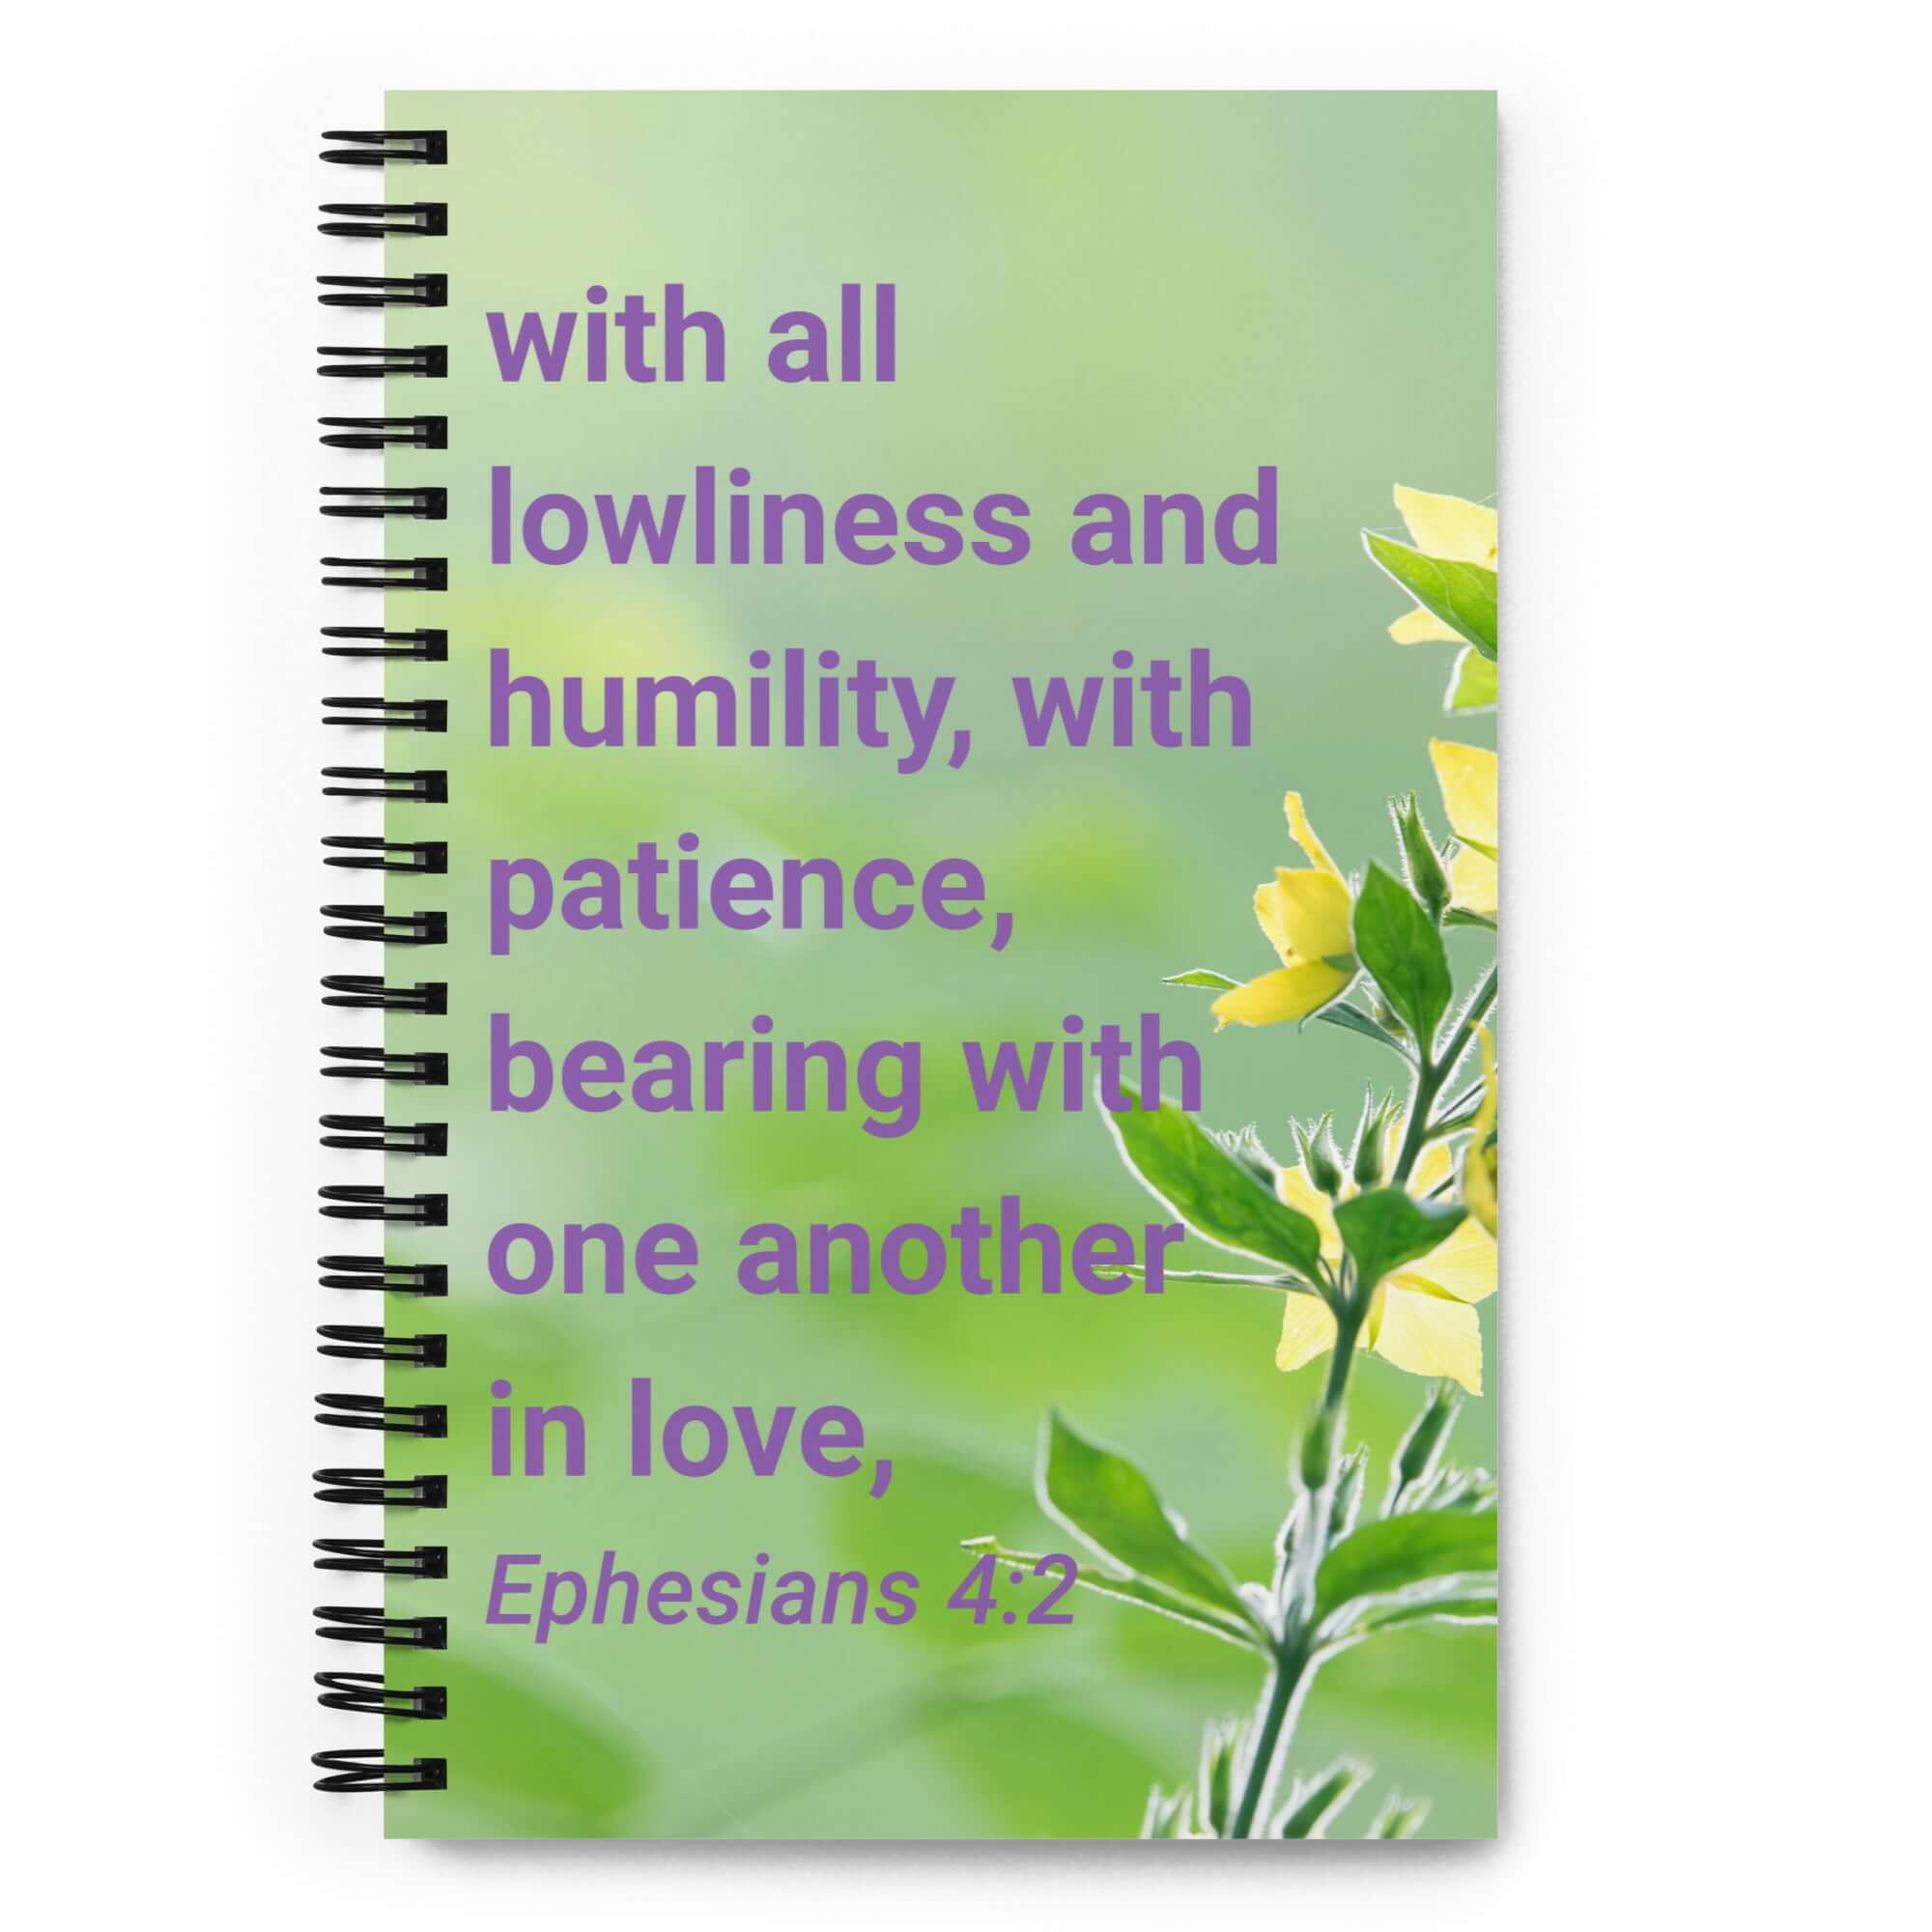 Eph 4:2 - Bible Verse, one another in love Spiral Notebook